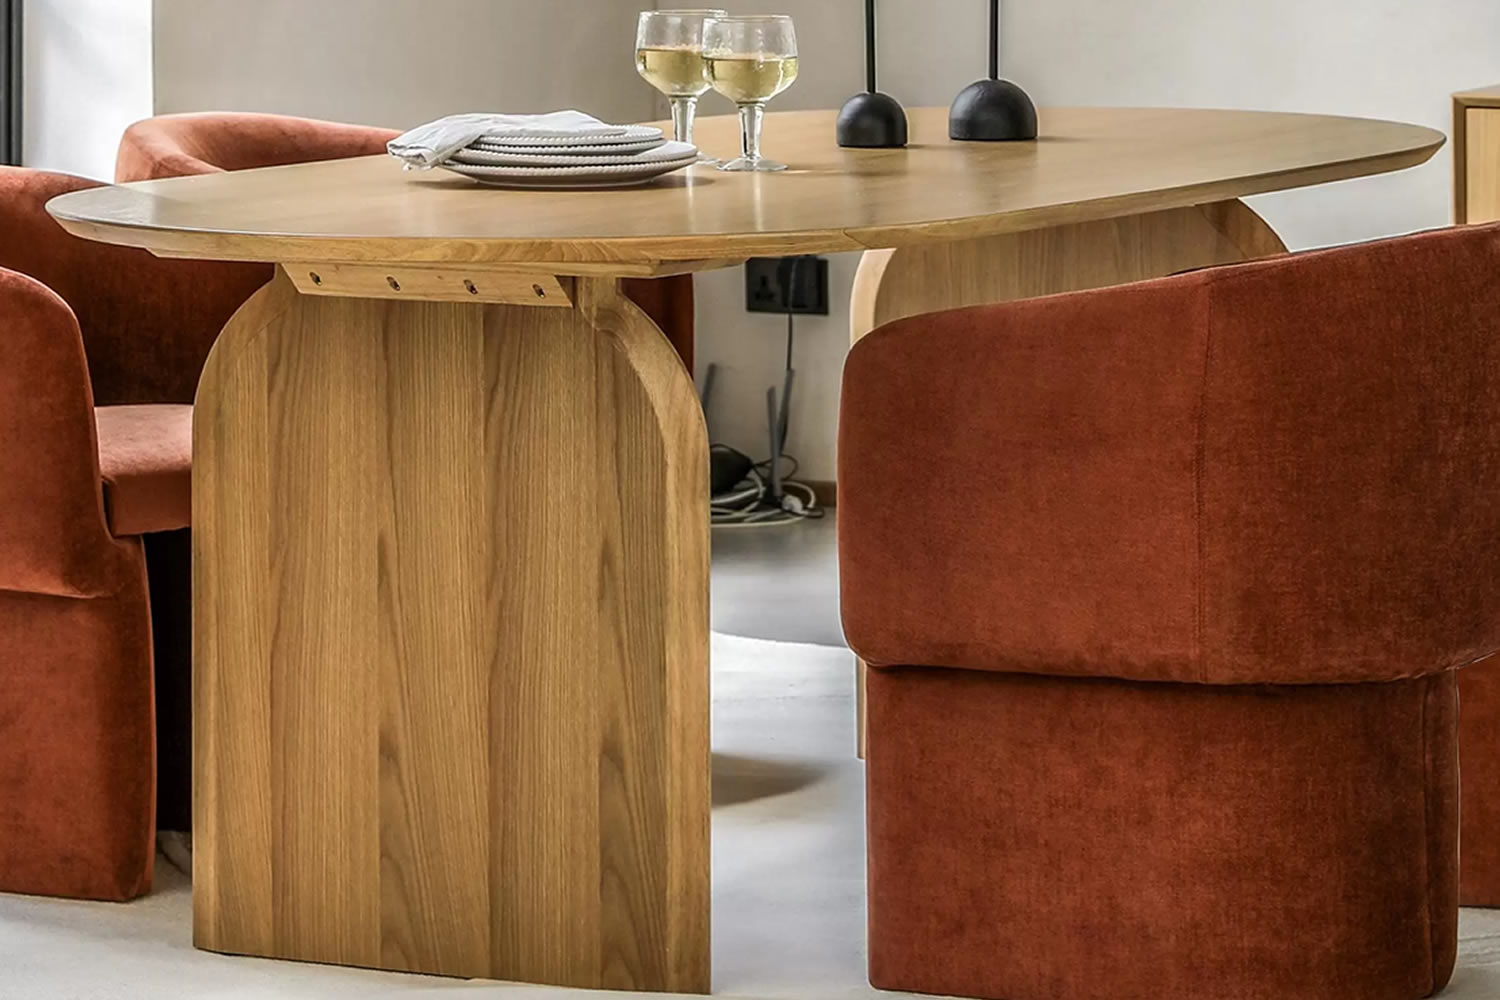 View Geo Dining Table Crafted From Durable MDF Oak Veneer Seats Up To 4 People Oval Top Solid Legs Perfect Piece For Your Dining or Living Area information